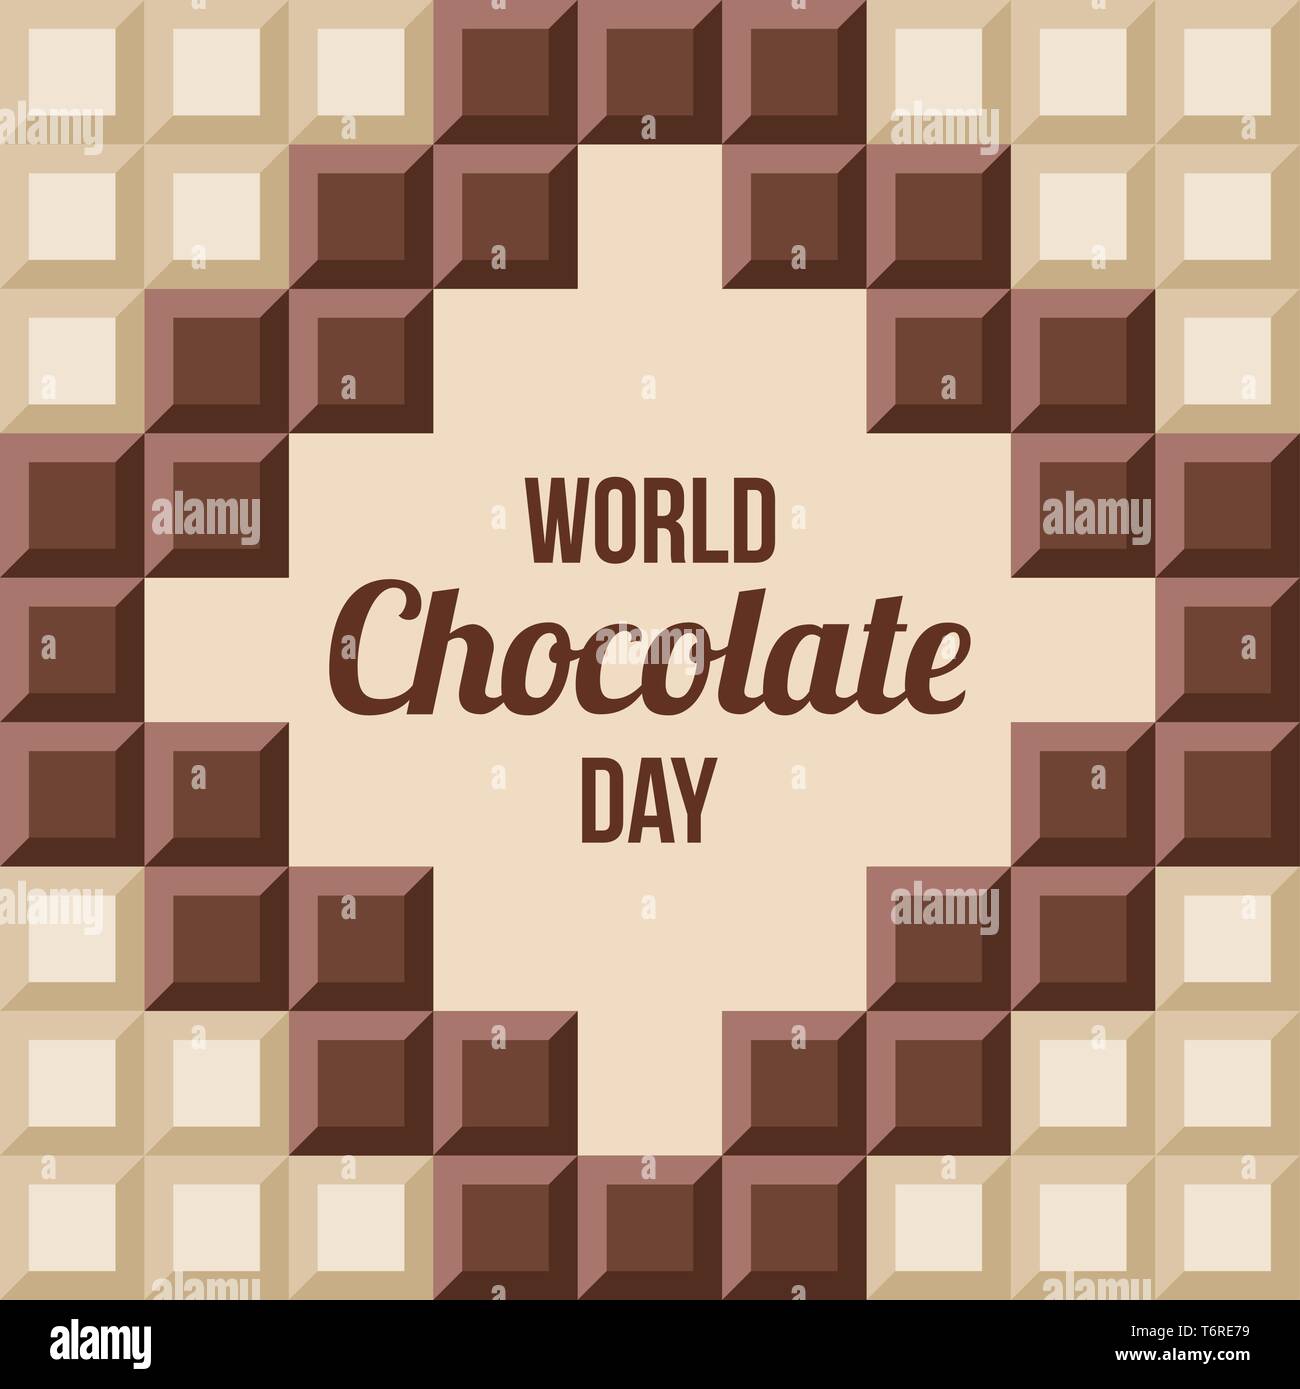 World Chocolate Day.11 July. Сhocolate bars with text inside. Design for poster, banner, greeting card. Seamless background. Vector color illustration Stock Vector